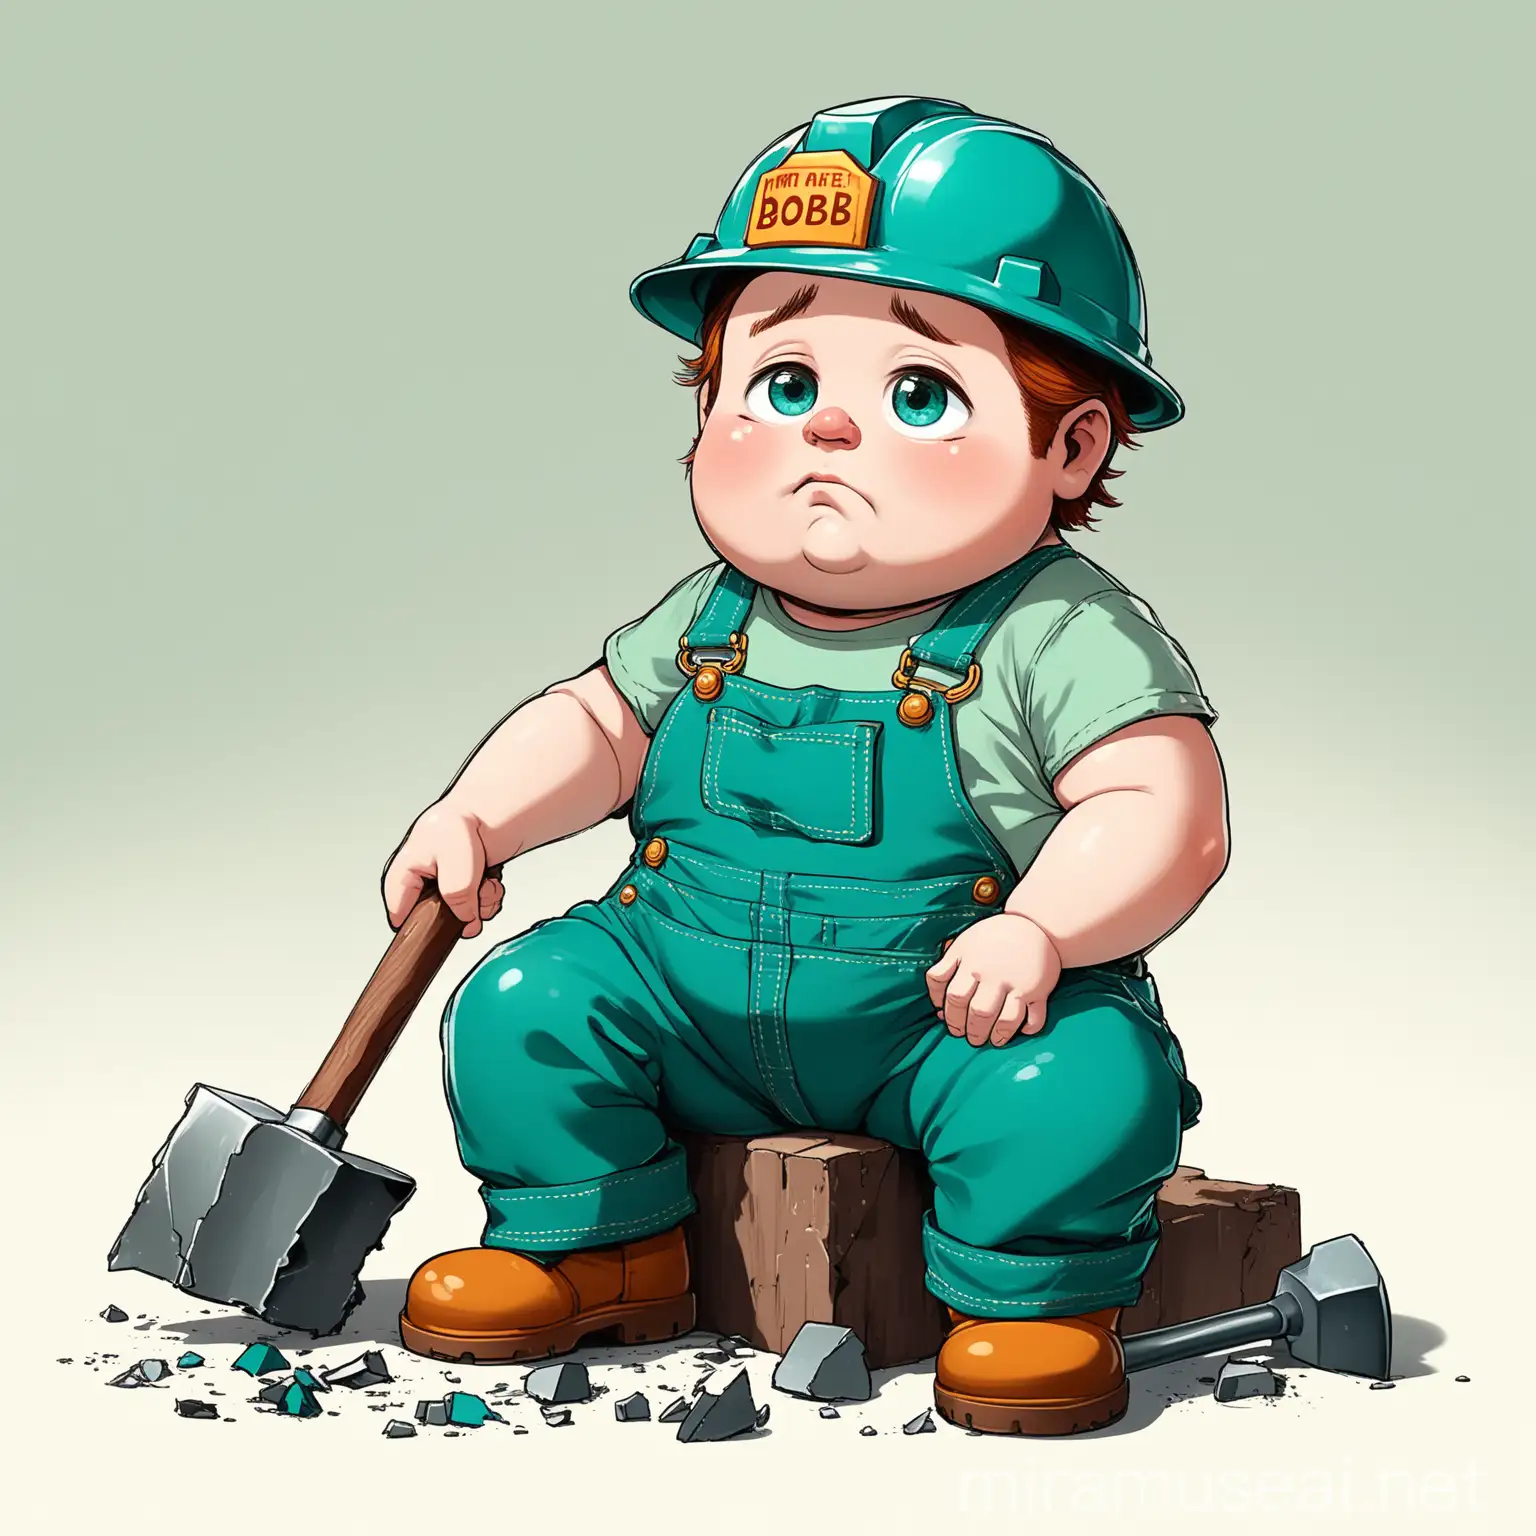 Appearance:

A chubby, short dwarf with a round face, rosy cheeks, and a small nose.
Large, expressive eyes with a sad expression and possibly a single tear to emphasize the sadness.
Short, thick limbs with stubby fingers and toes.
Clothing:

A teal-colored shirt with short sleeves.
Lawngreen overalls with large buttons on the straps.
Brown work boots that look well-worn and slightly oversized for a comical effect.
A teal construction hat with a slightly oversized brim, slightly tilted on his head.
Accessories:

A broken hammer lying beside him on the floor, with the handle snapped in half and the head of the hammer tilted.
A name tag or patch on the stomach area of his overalls with the name "BOB" written in a bold, friendly font.
Pose and Expression:

The dwarf is sitting on the floor with his legs spread out in front of him.
His arms are resting on his legs, with his hands drooping down.
A sad, forlorn expression on his face, looking down at the broken hammer.
Background:

A clean, white background to make the character stand out.
Optional: Simple, subtle elements like a faint shadow beneath him to ground the character.
Theme Colors:

Teal for the shirt and construction hat.
Lawngreen for the overalls.
Brown for the boots.
The background should remain white to keep the focus on the character and emphasize the colors.